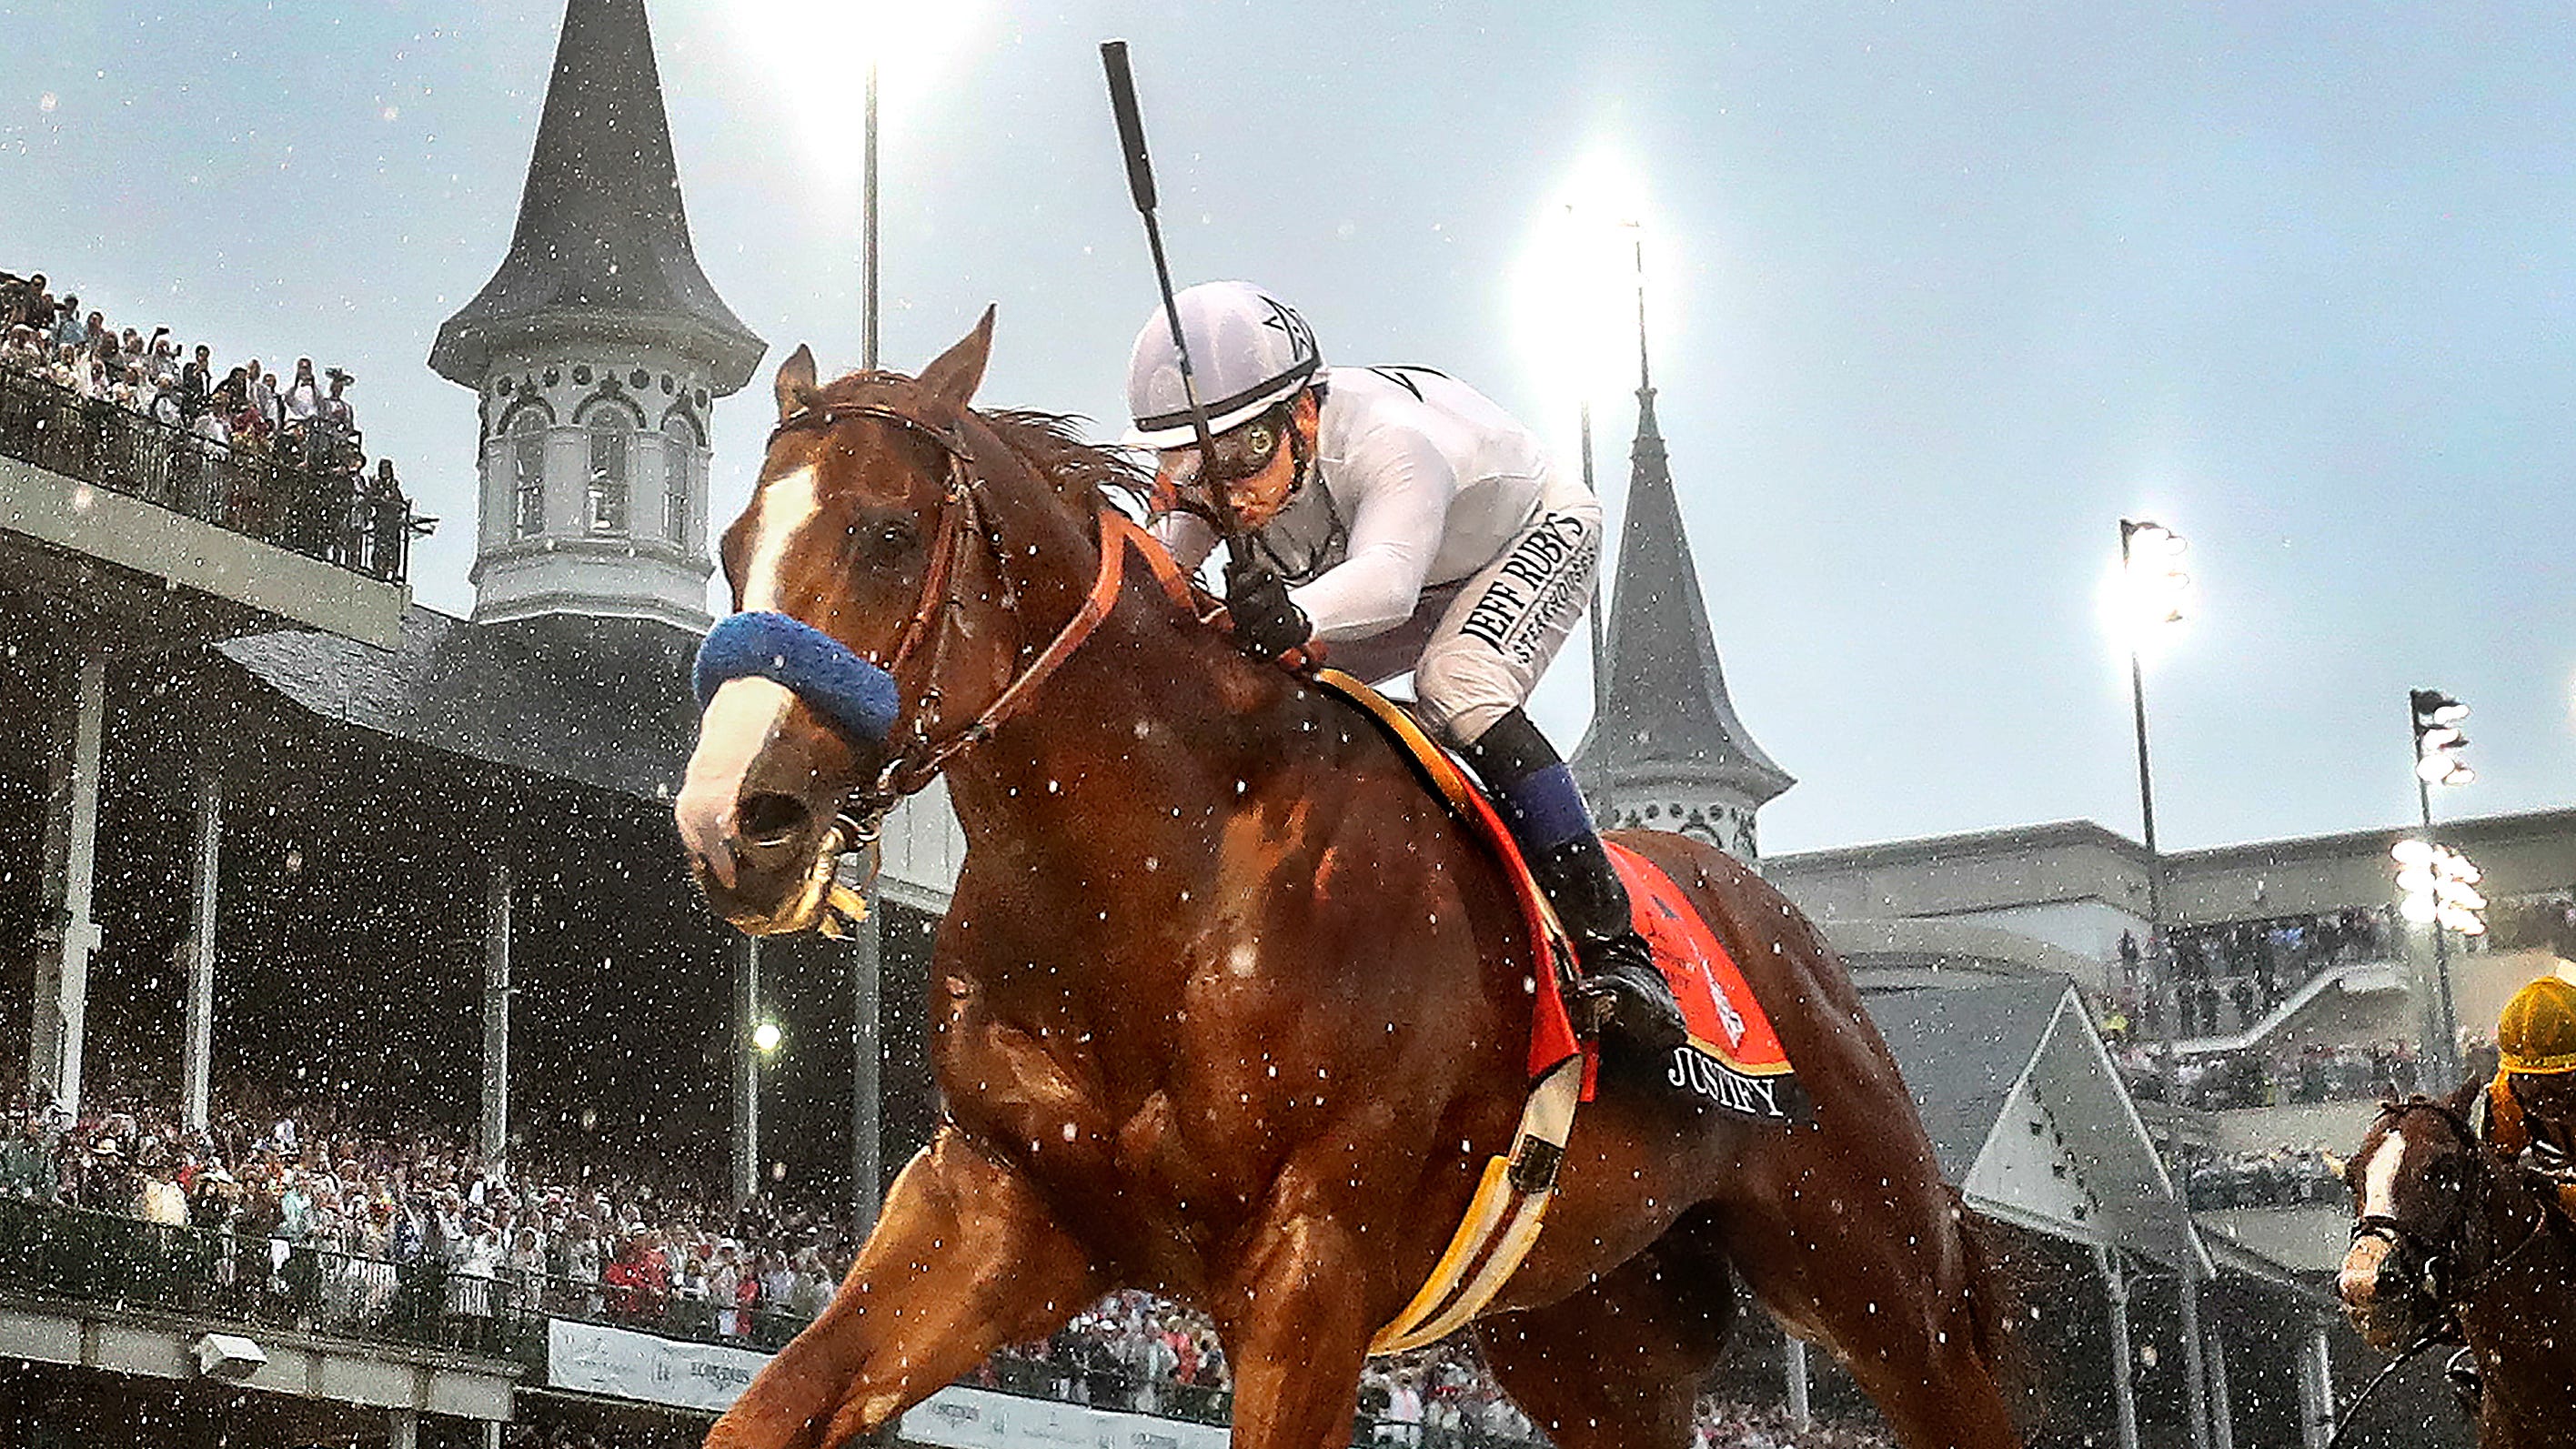 Justify failed drug test weeks before Kentucky Derby win, report says